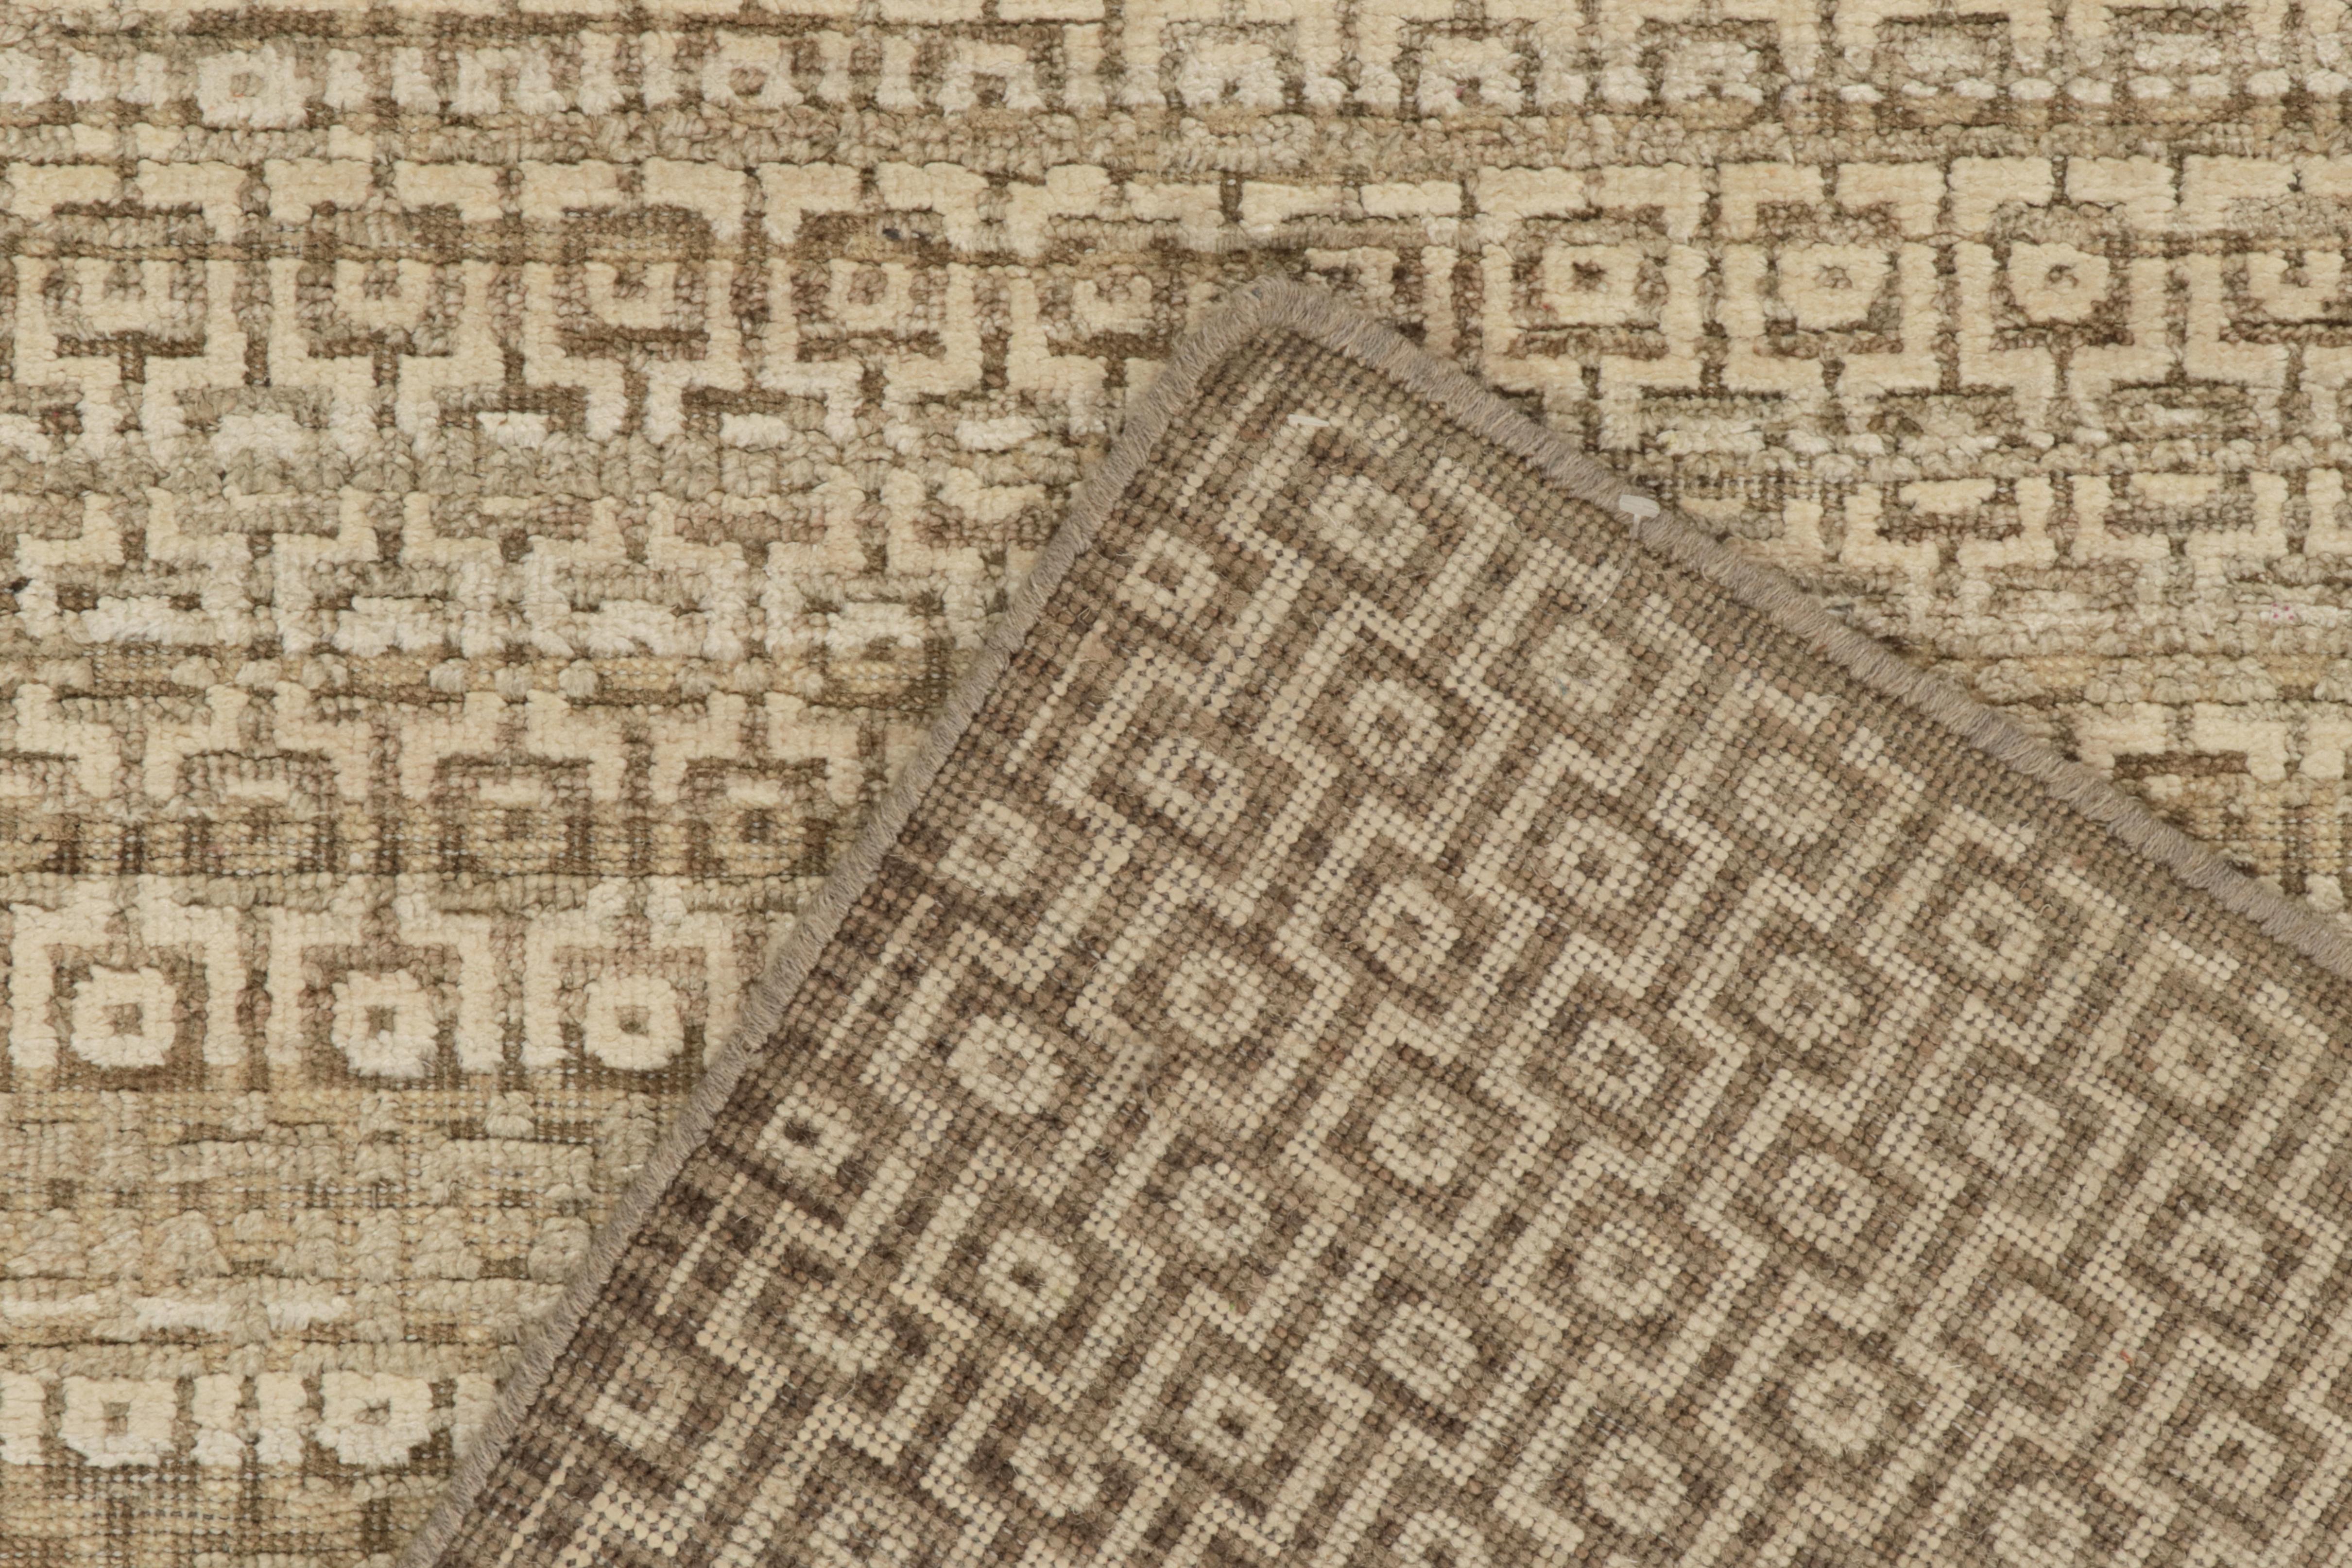 Wool Rug & Kilim’s Modern Textural Runner in Beige-Brown and White Geometric Patterns For Sale